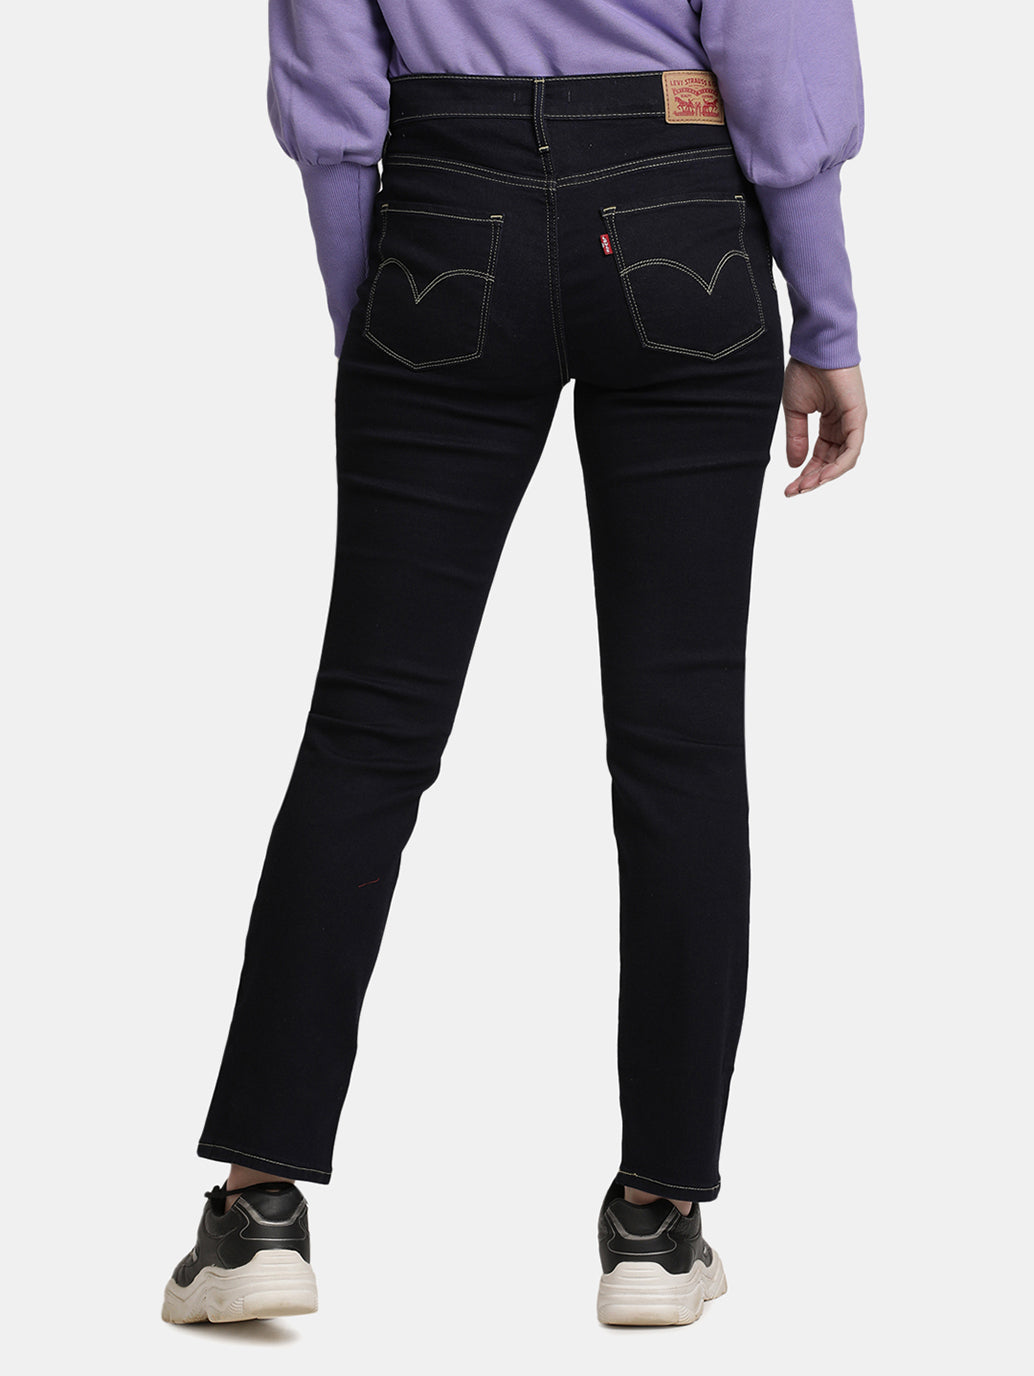 Women's 724 Straight Fit Jeans